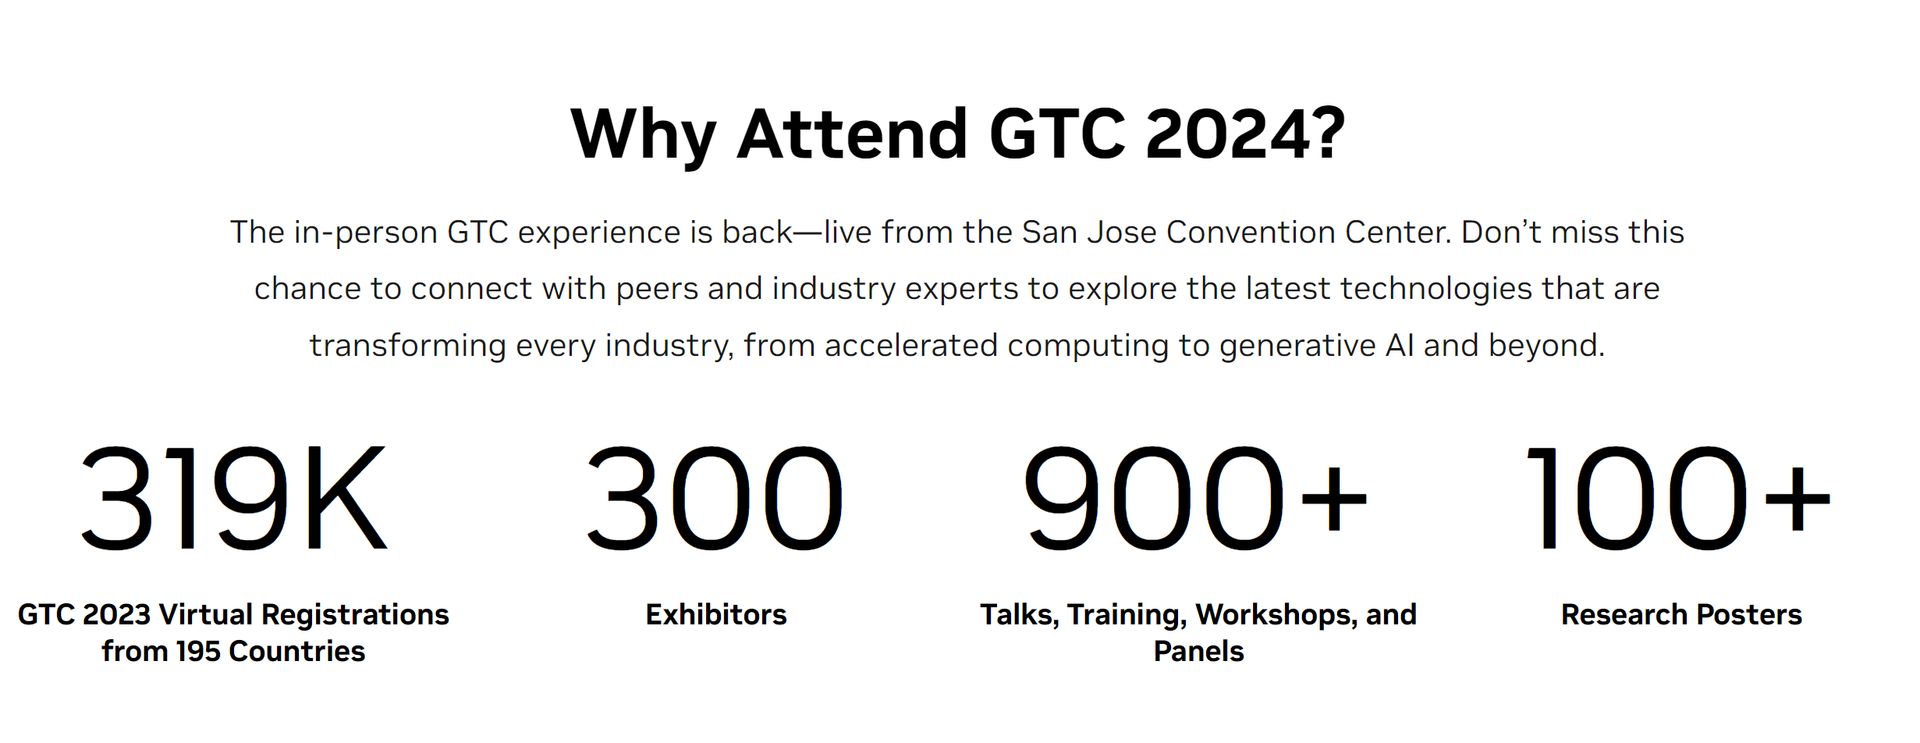 Exciting developments await at Nvidia's GTC 2024